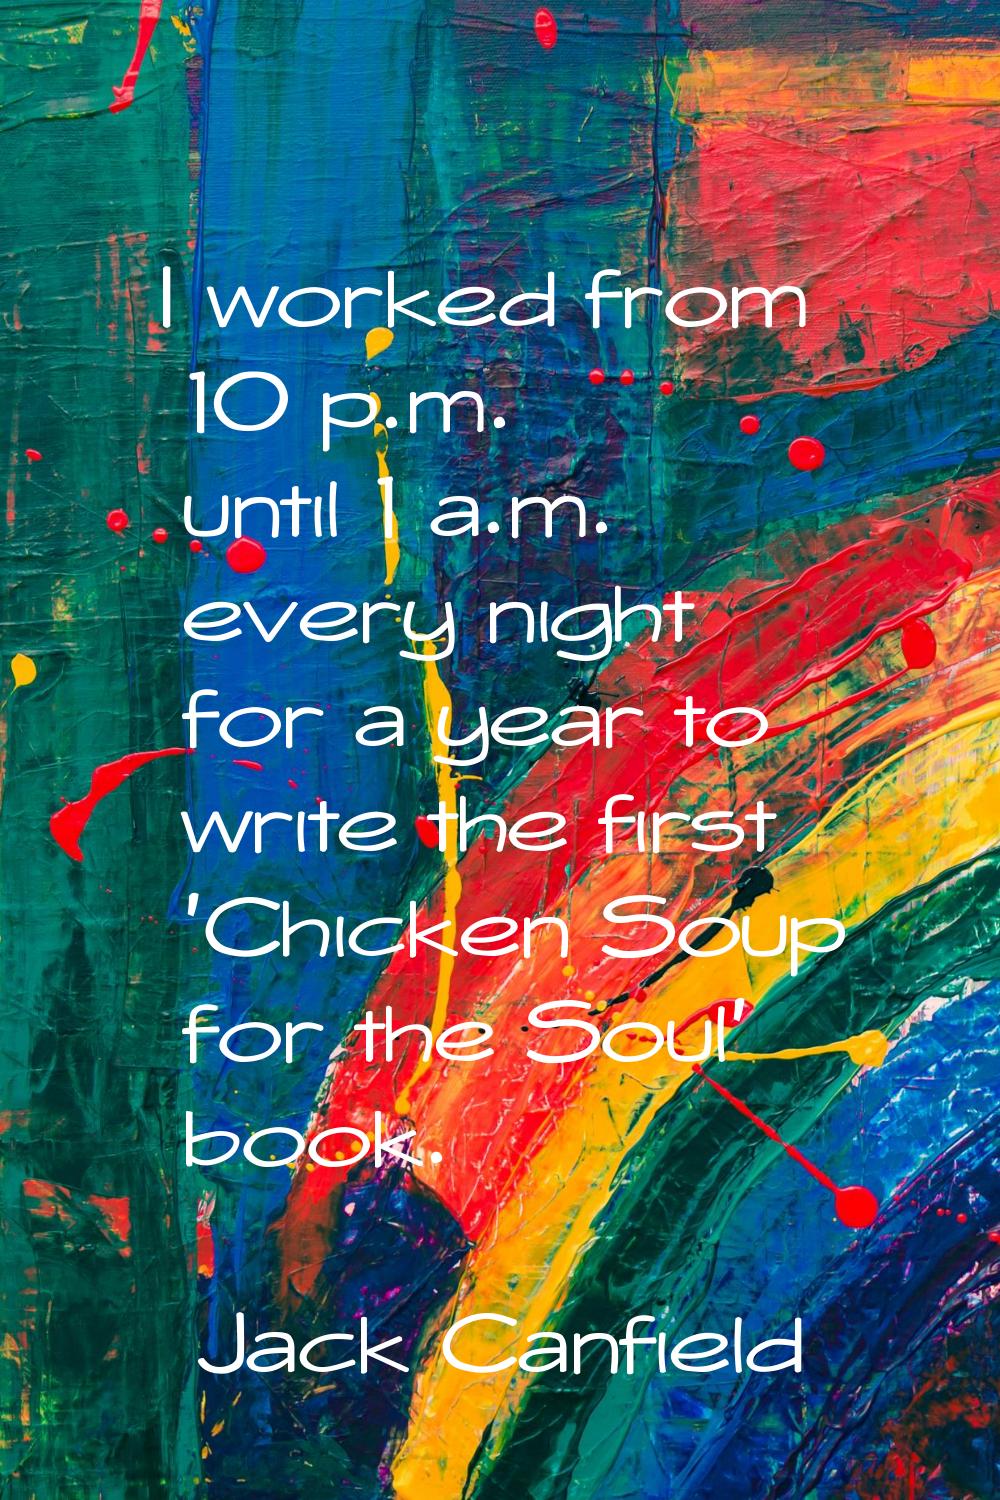 I worked from 10 p.m. until 1 a.m. every night for a year to write the first 'Chicken Soup for the 